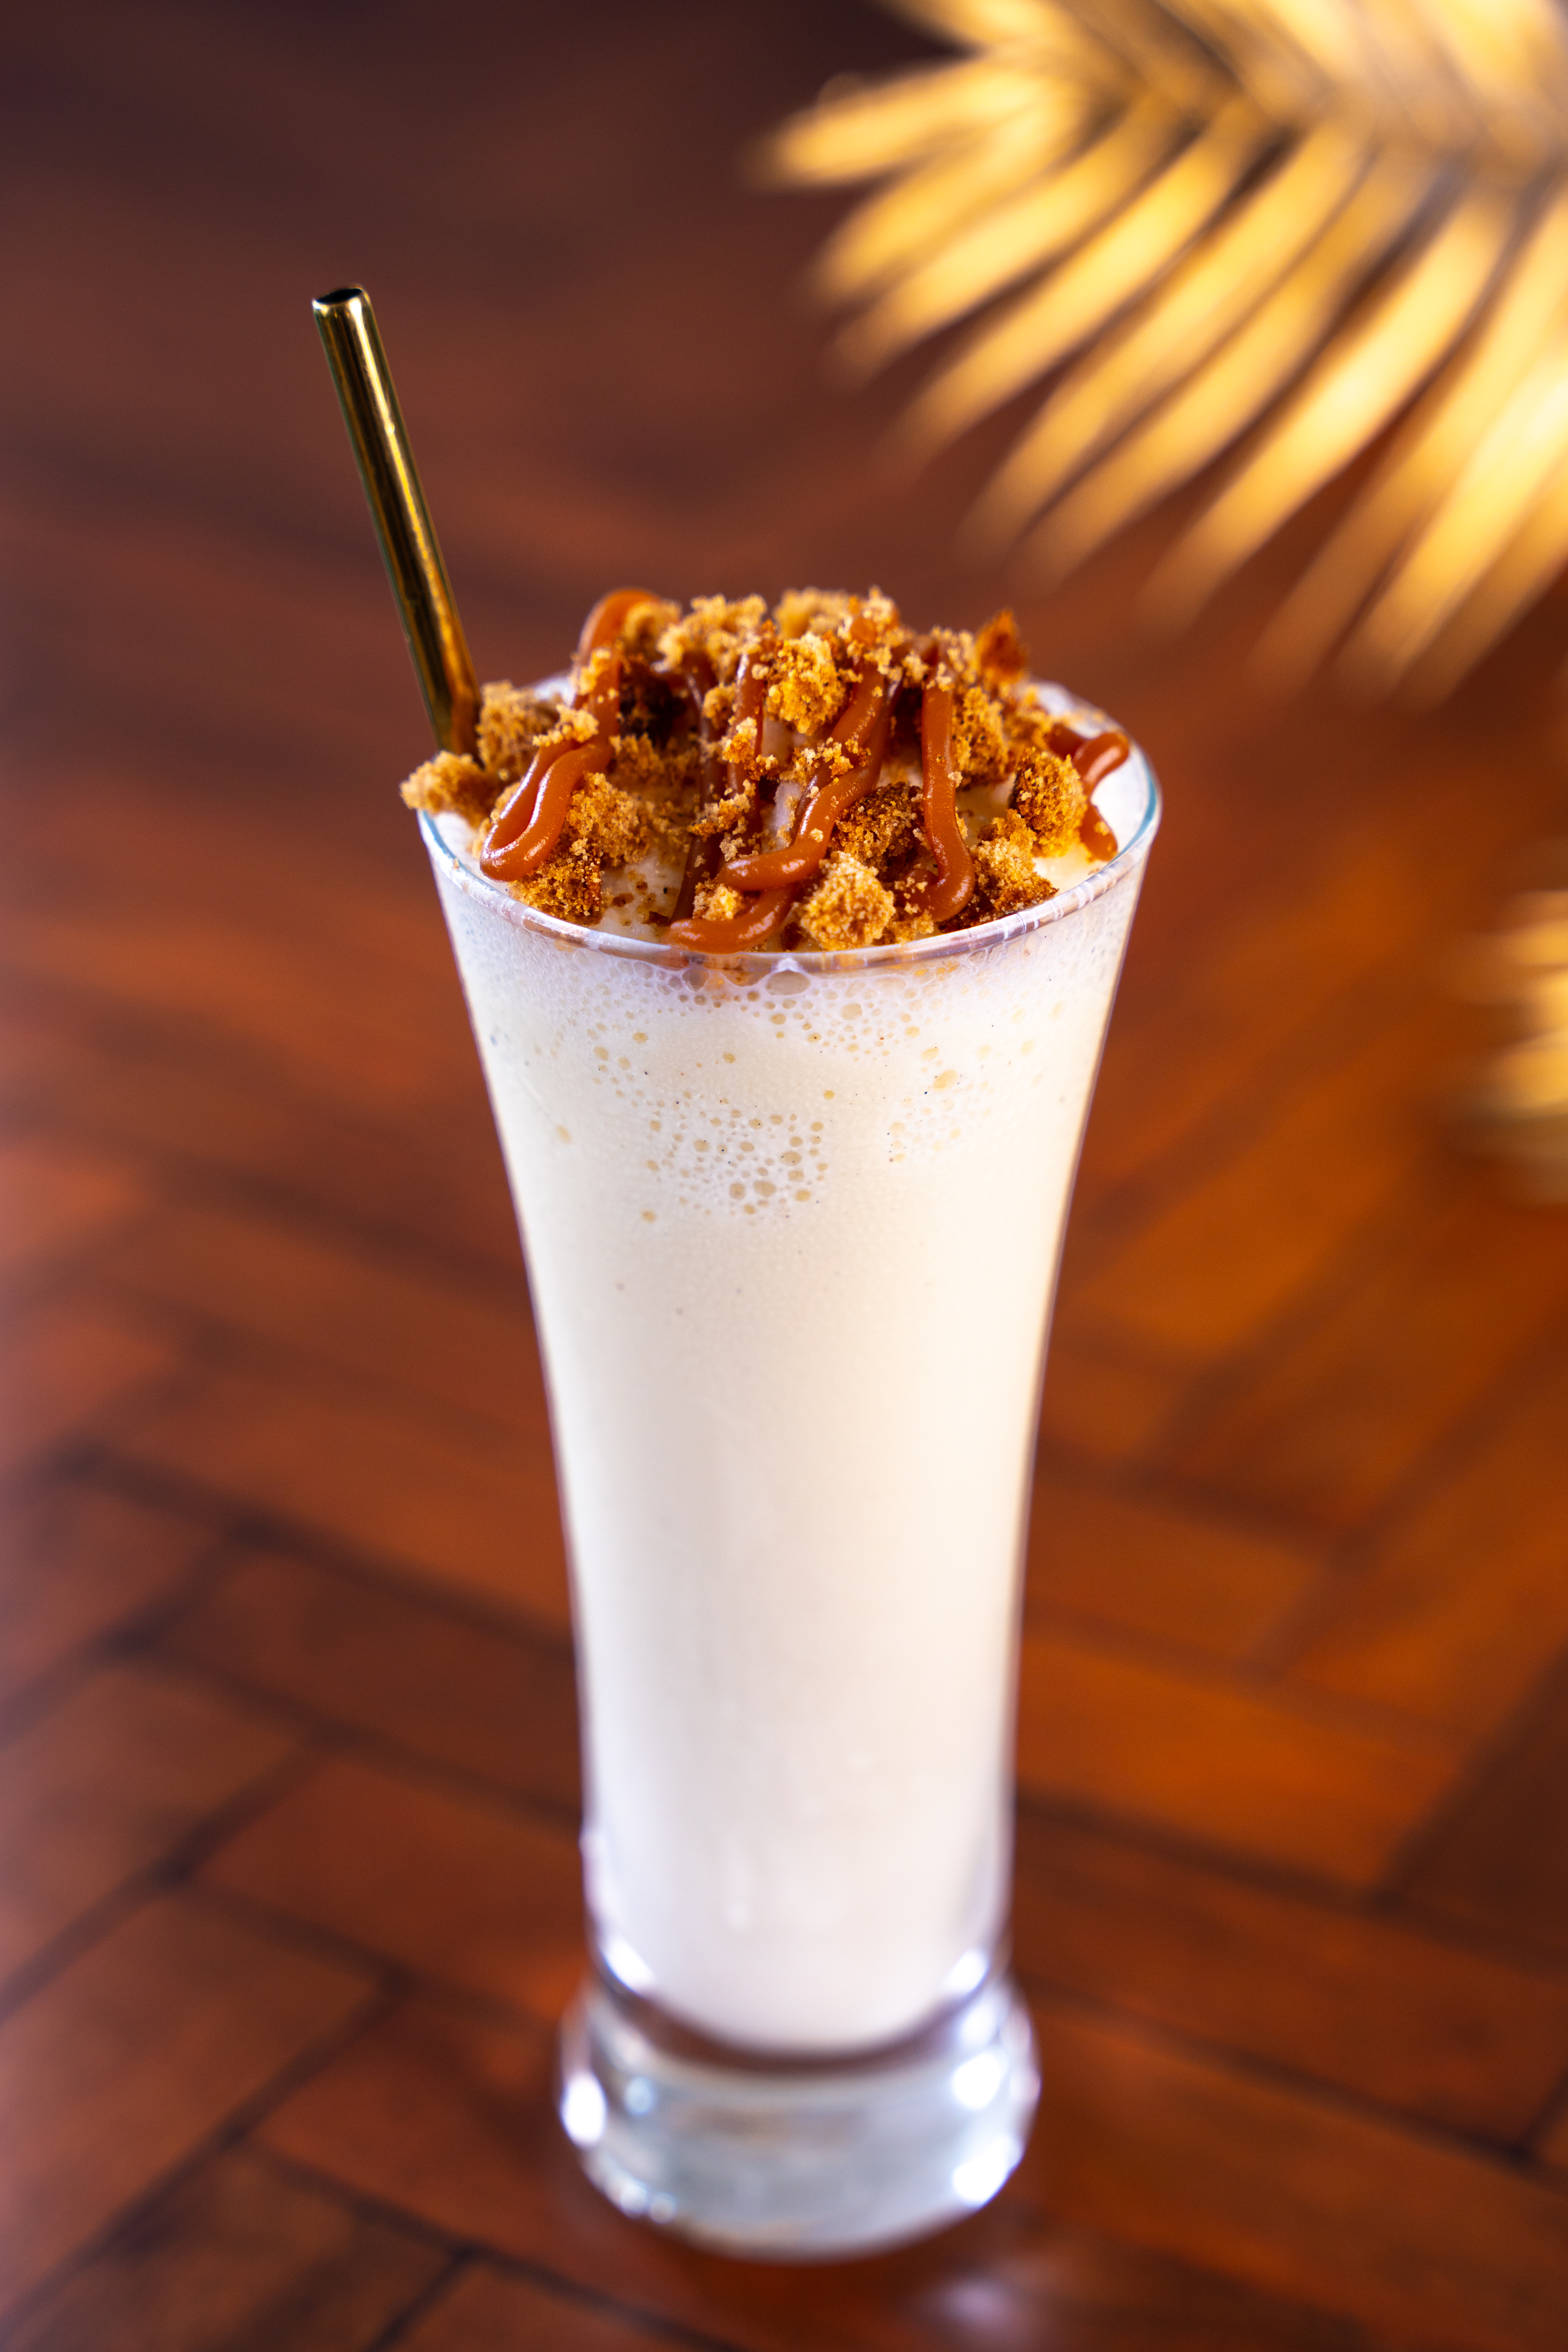 On a polished wooden surface there is a tall milkshake glass, containing a white coloured milkshake. The drink is topped with gingerbread crumbs and caramel sauce. 